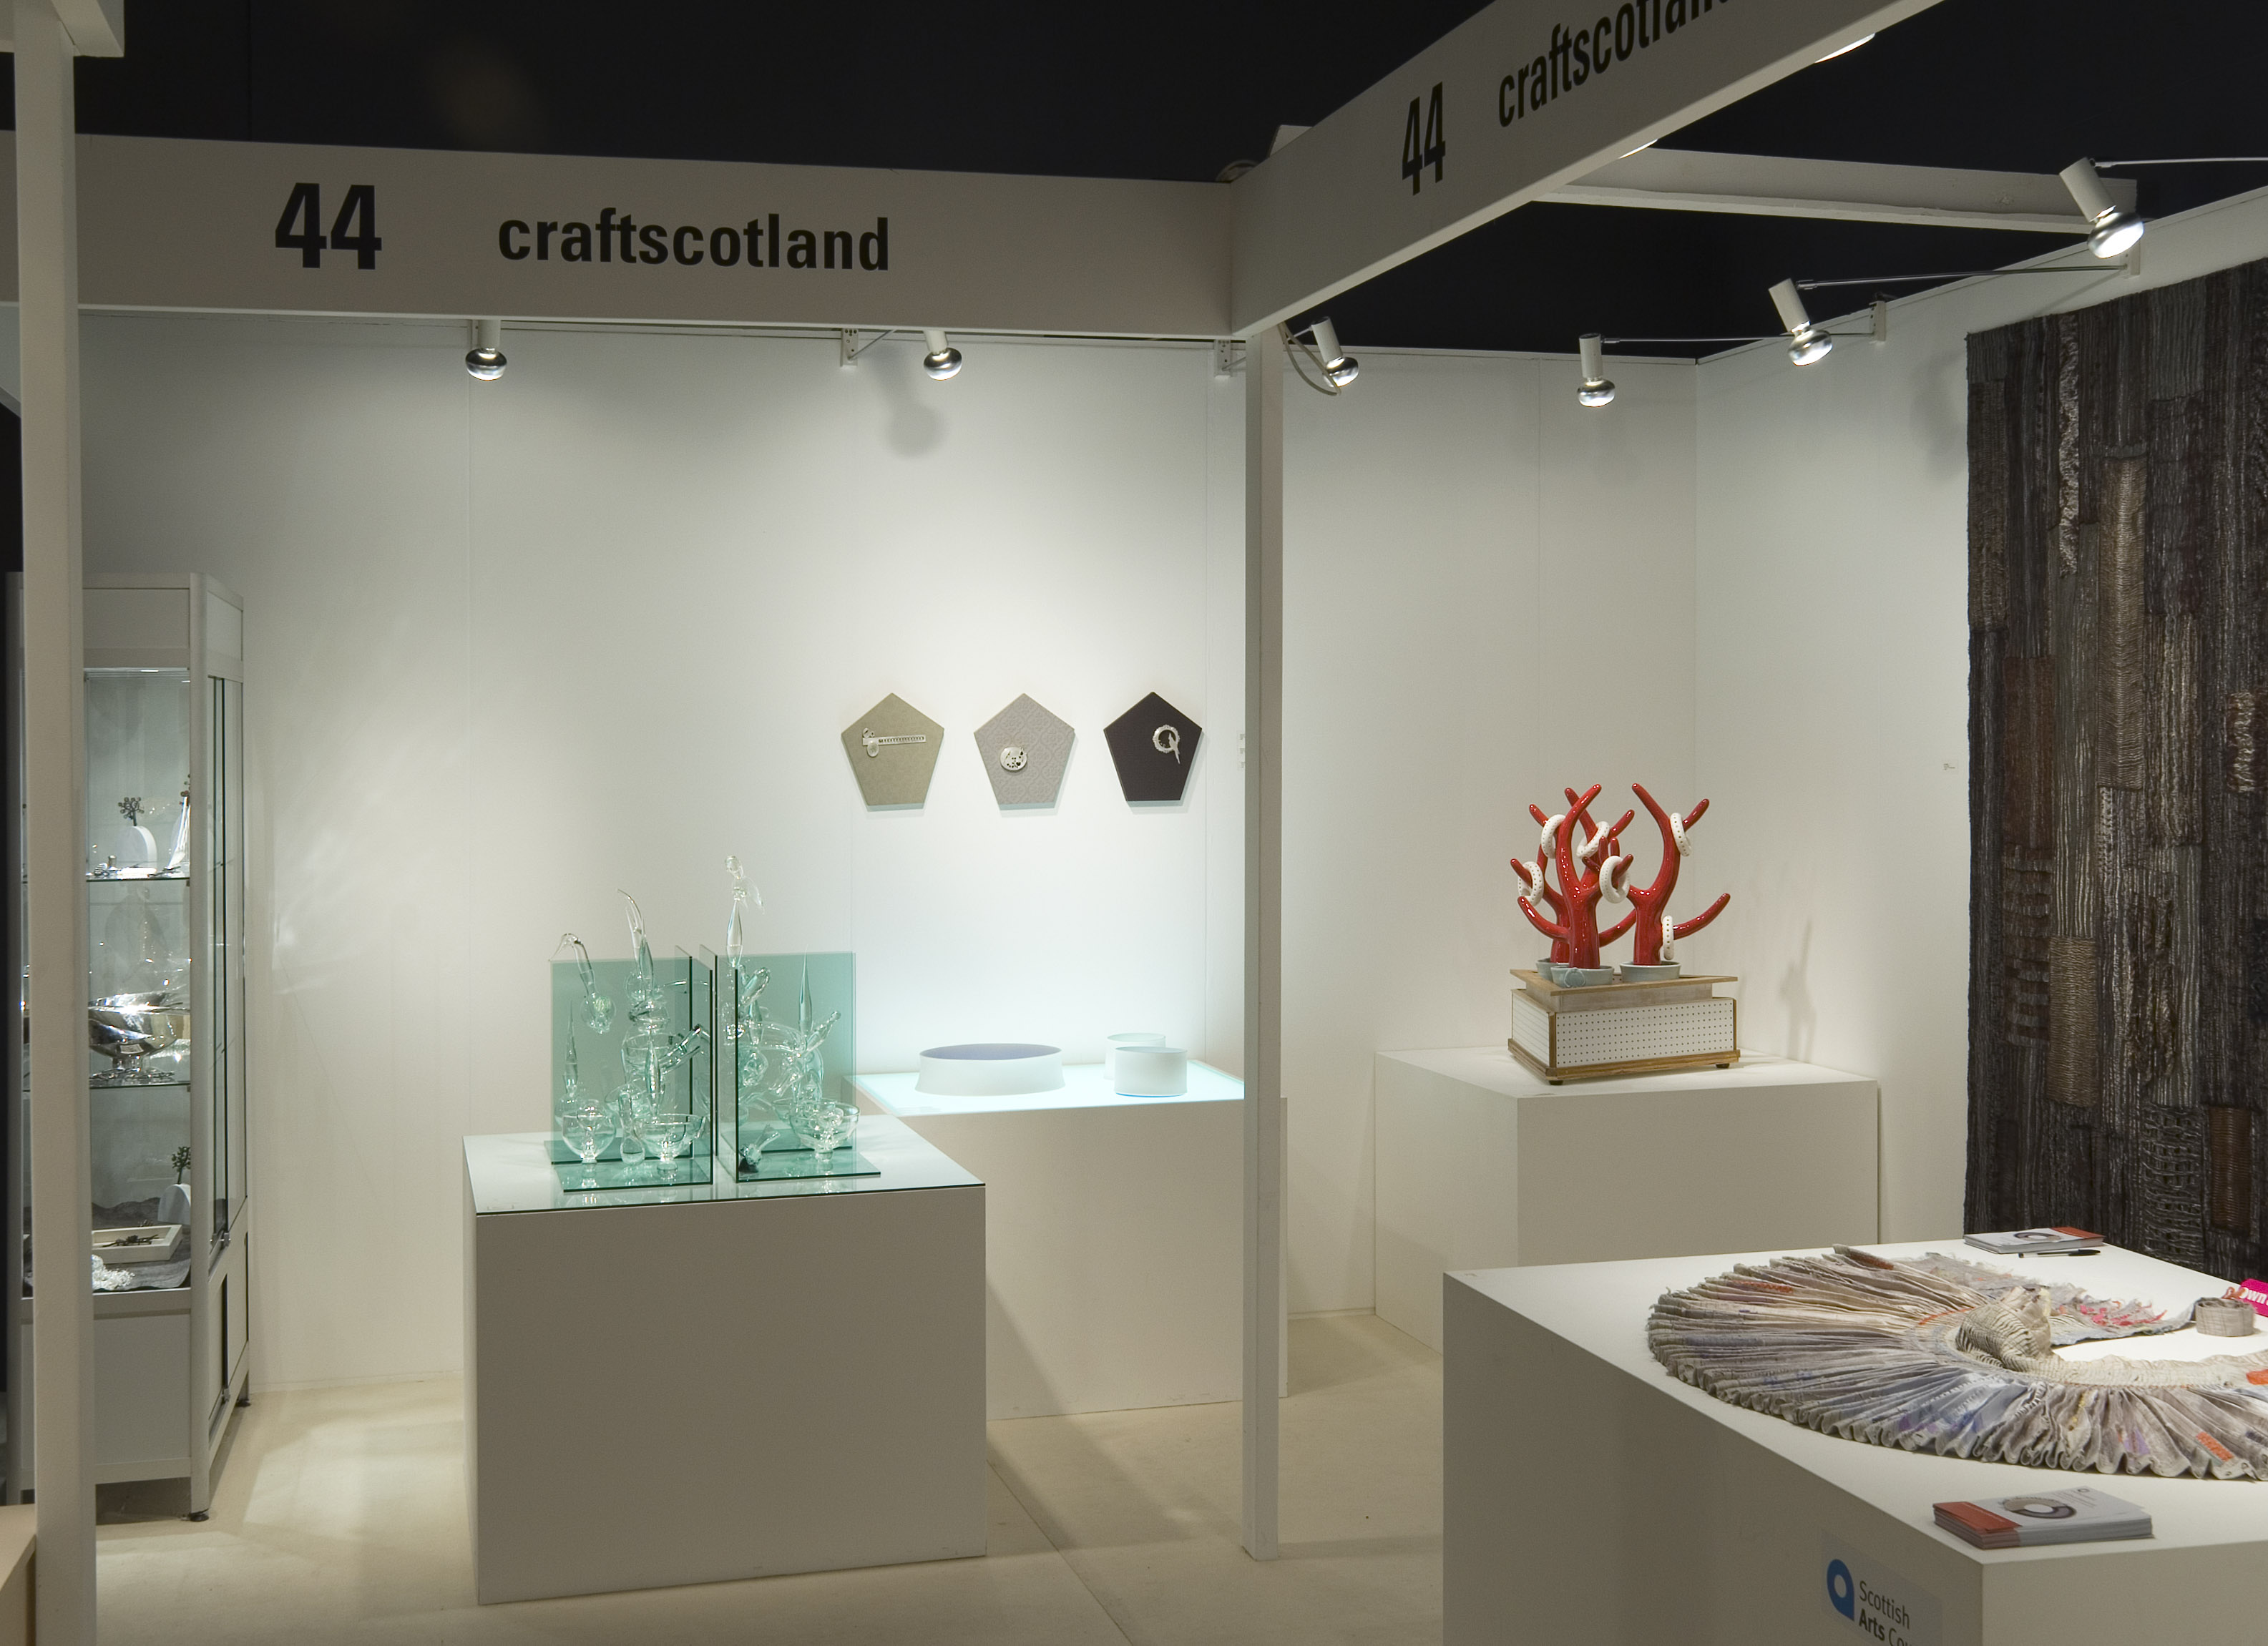 craftscotland at Collect 2008 / Shannon Tofts